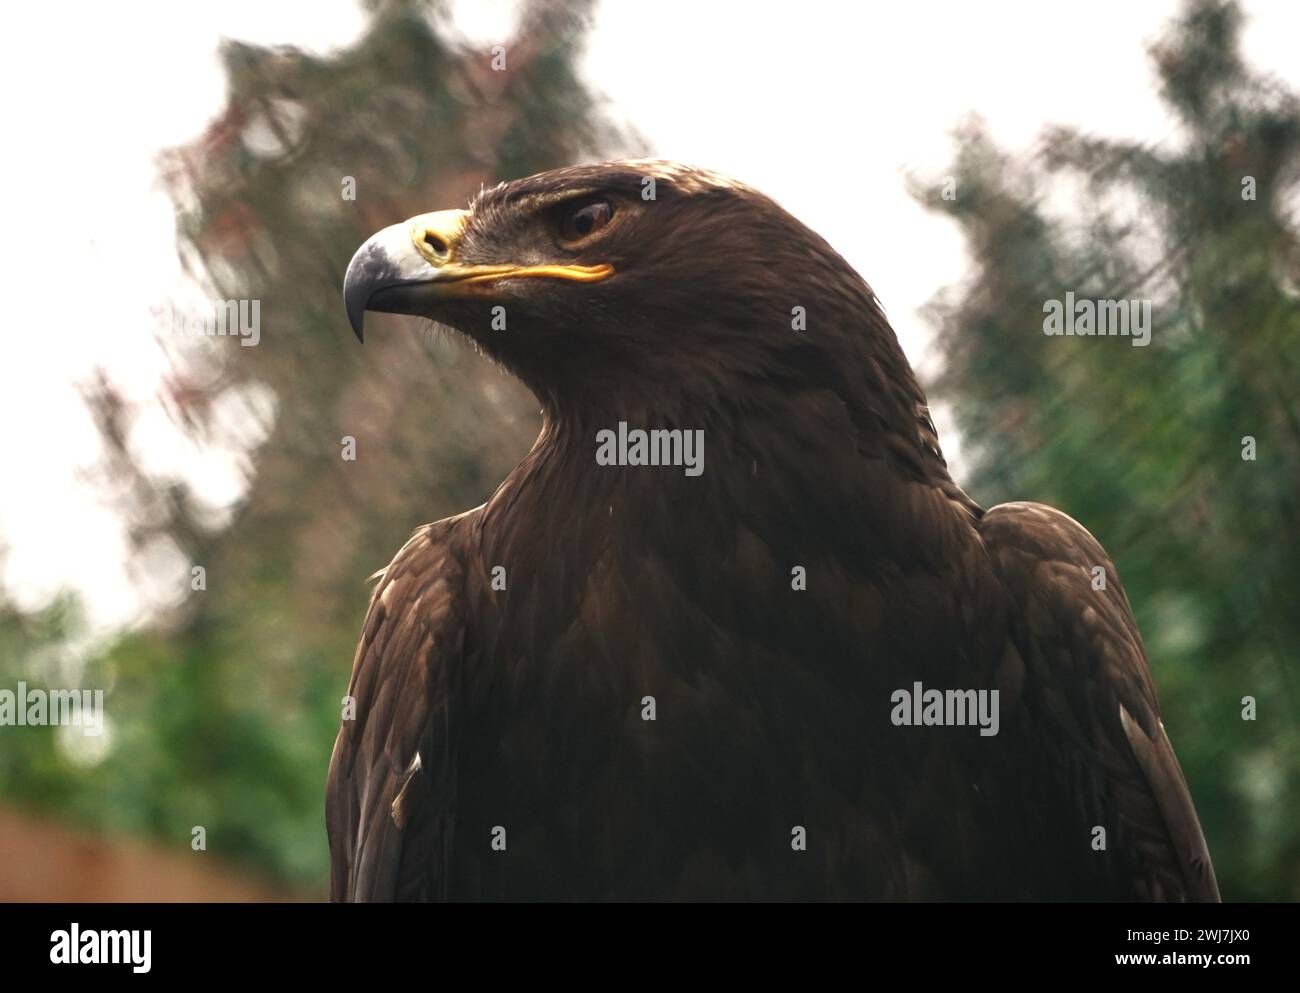 Majestic eagle perched on a tree stump, gazing left Stock Photo